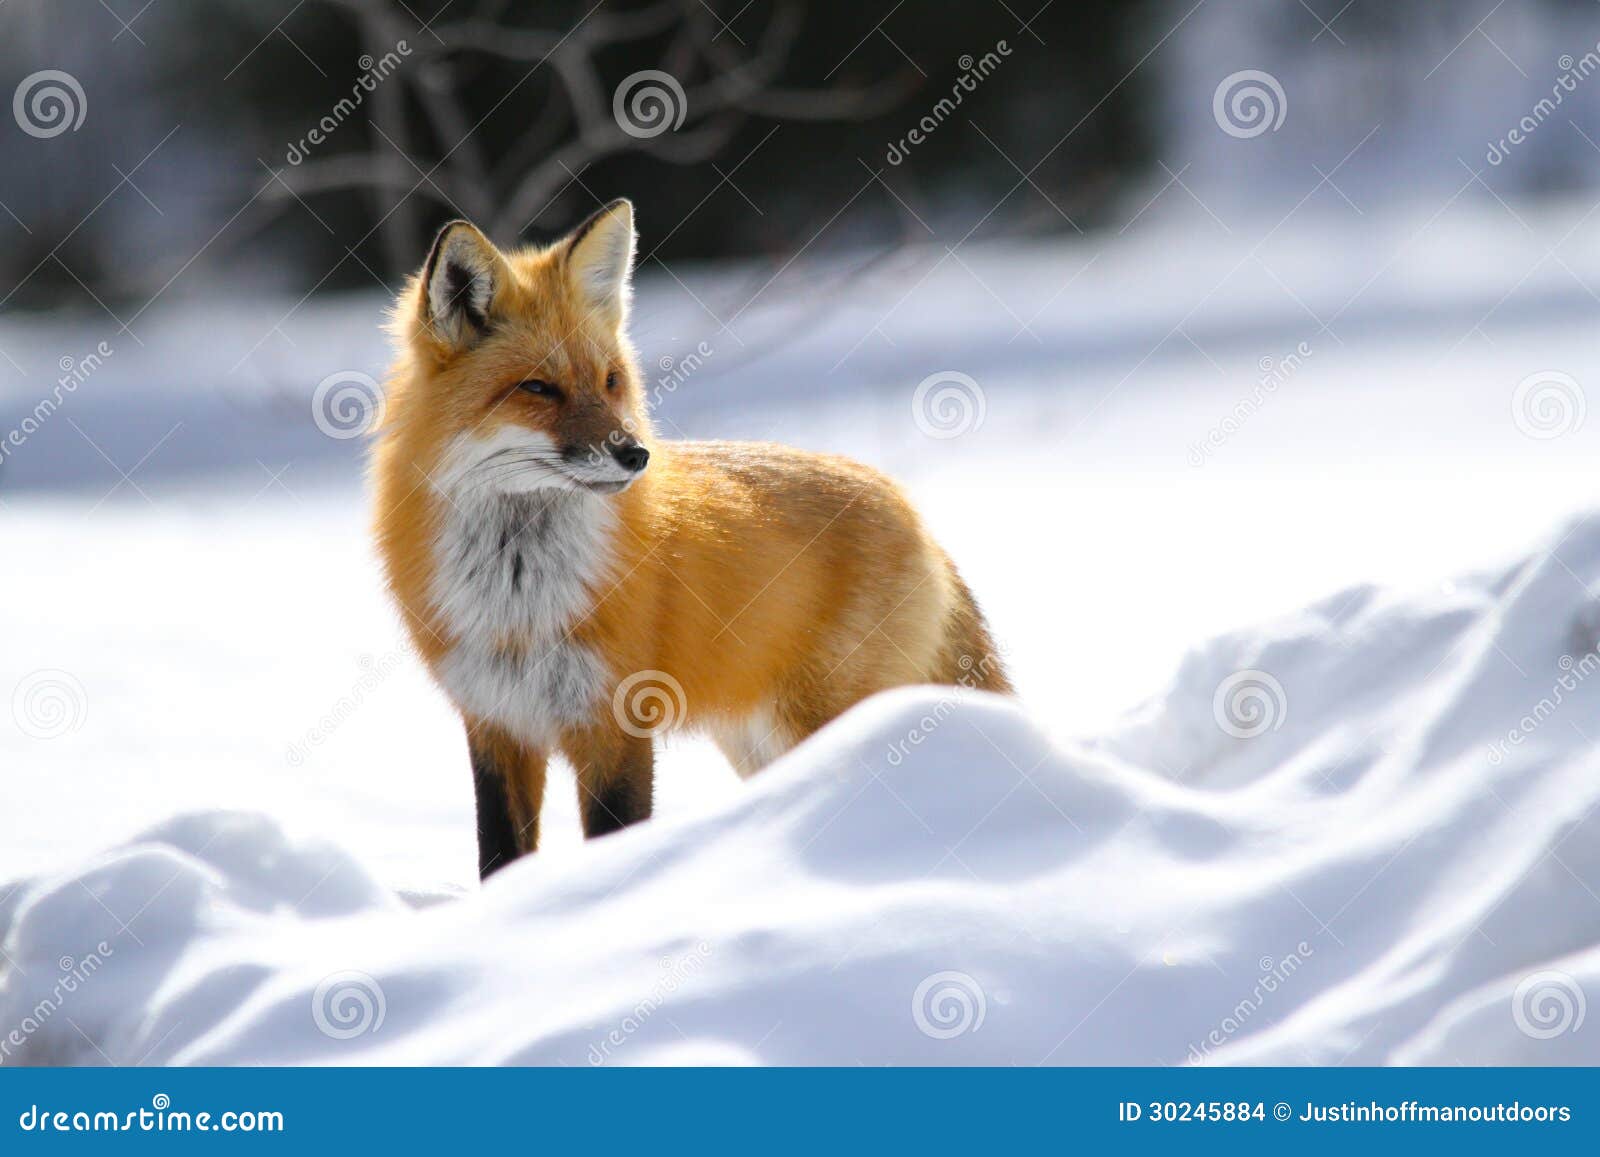 red fox poses in snow